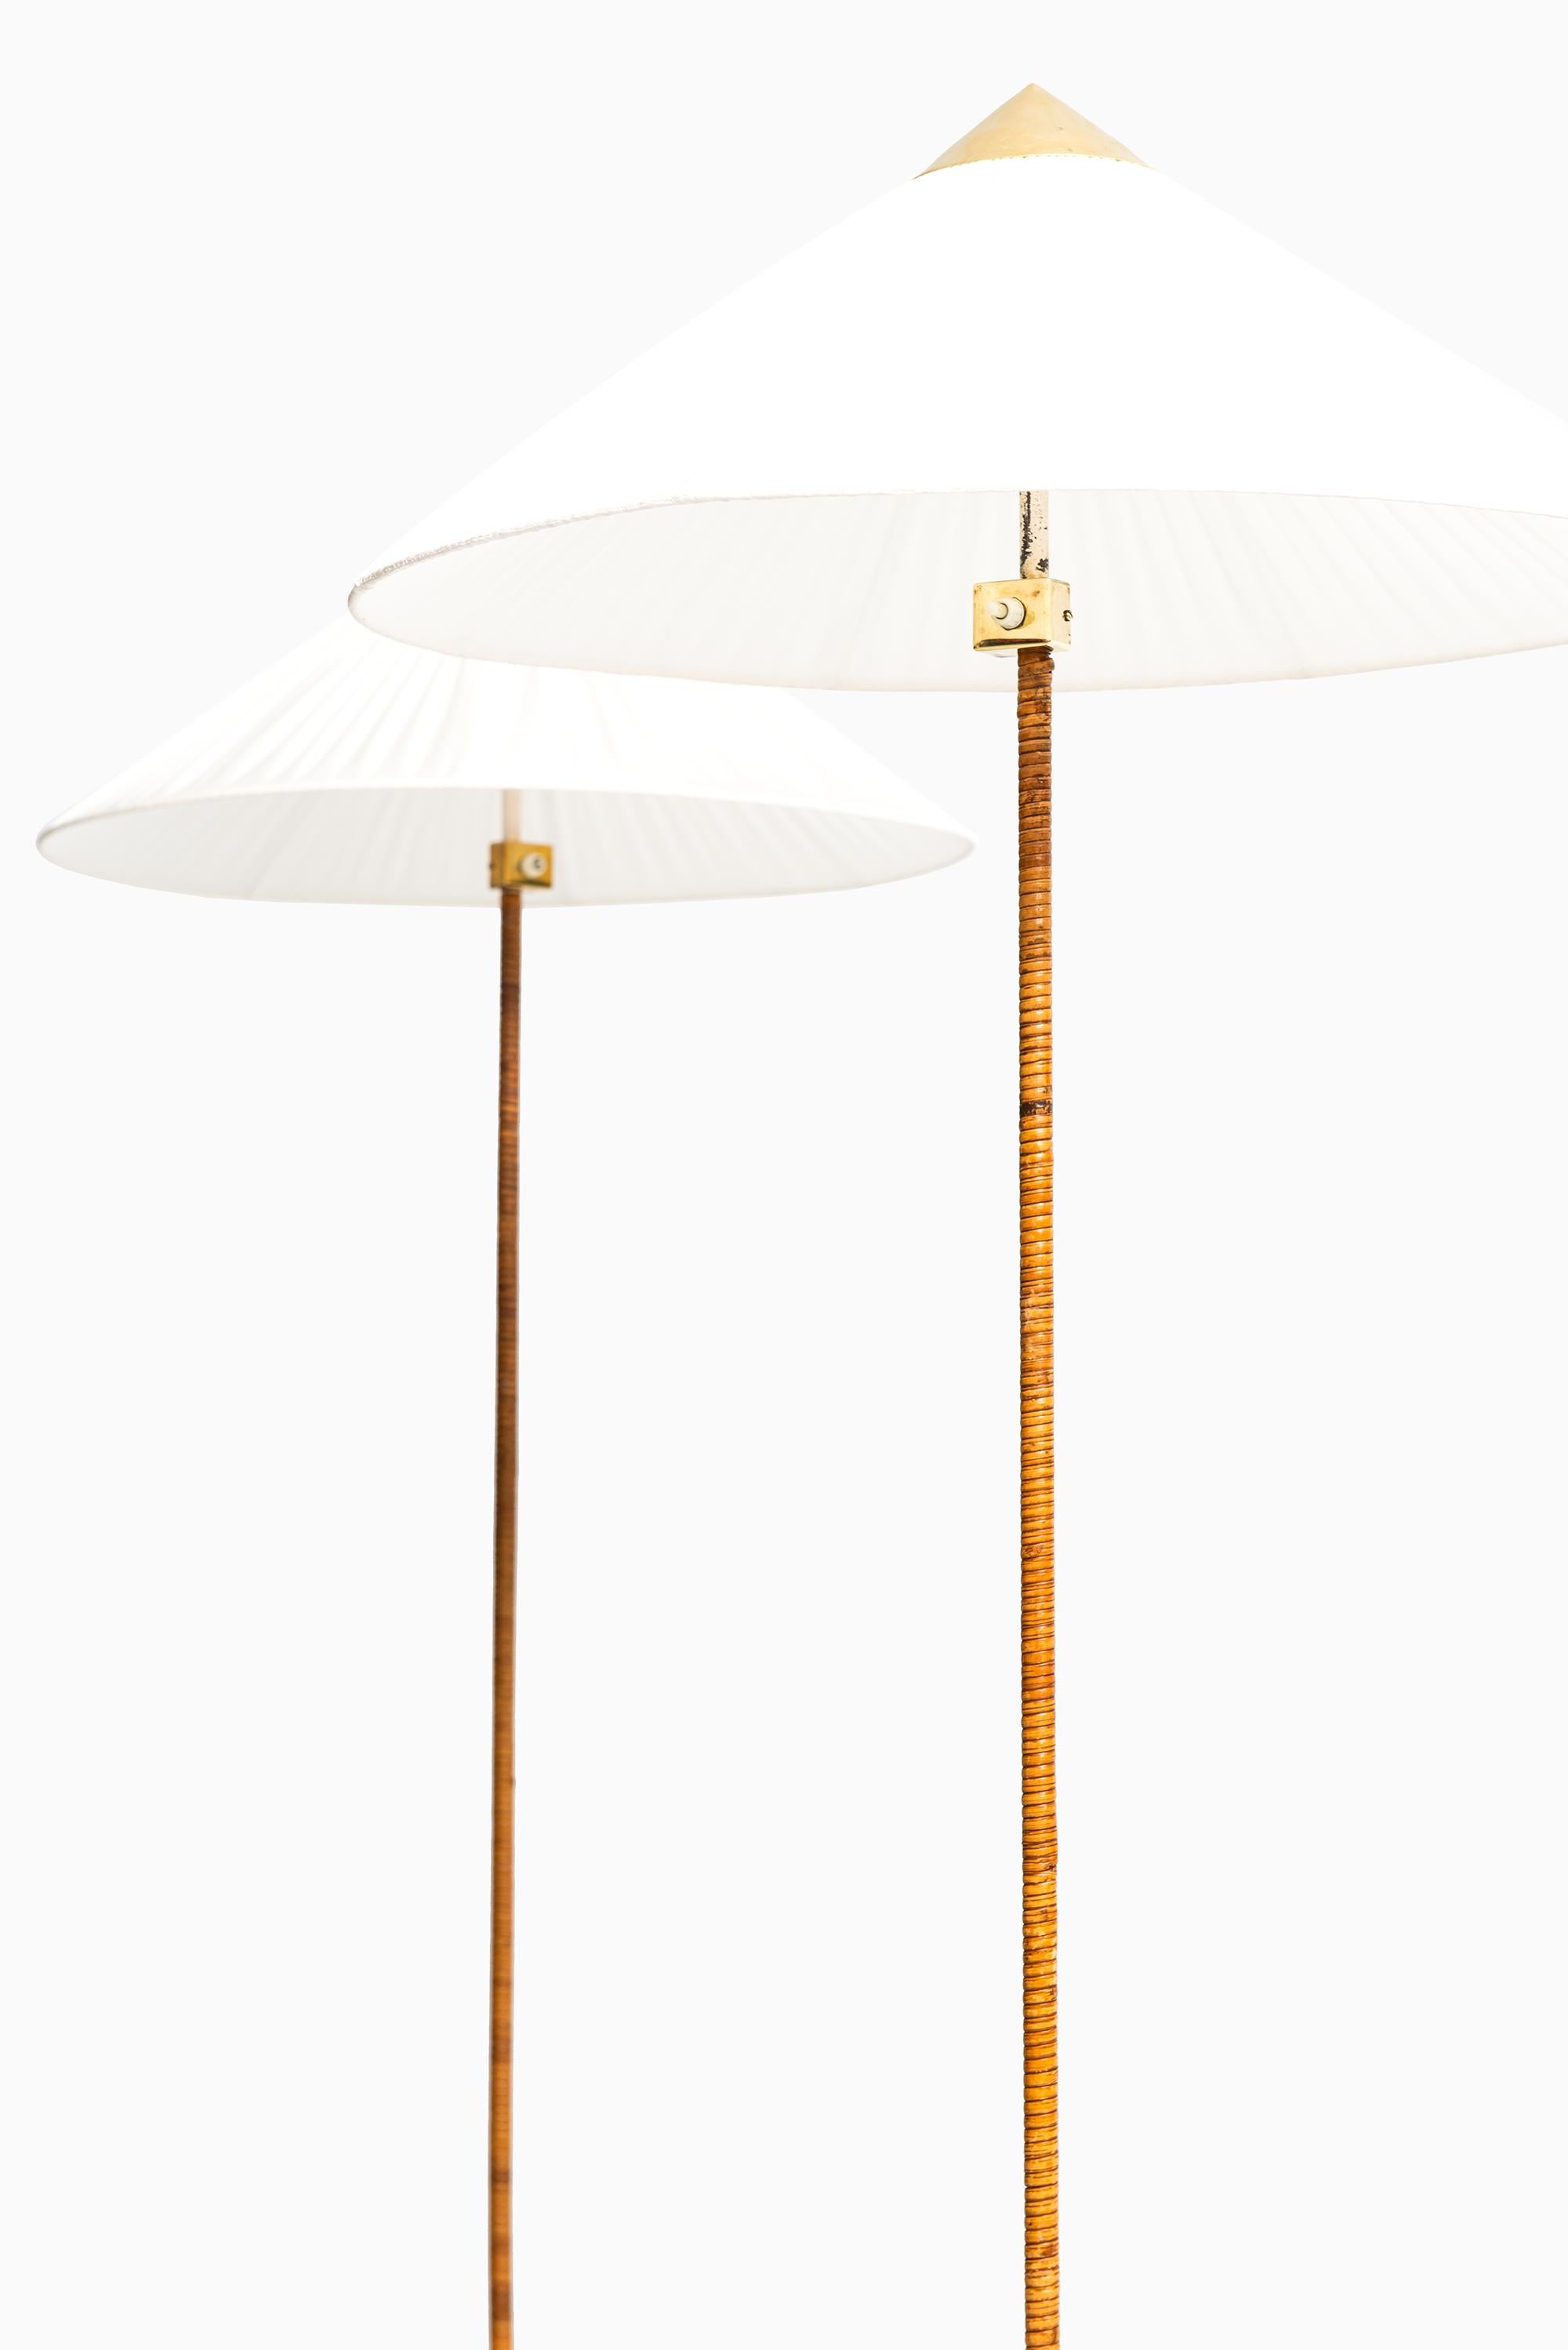 Very rare pair of floor lamps model 9602 / Chinese hat designed by Paavo Tynell. Produced by Taito Oy in Finland.